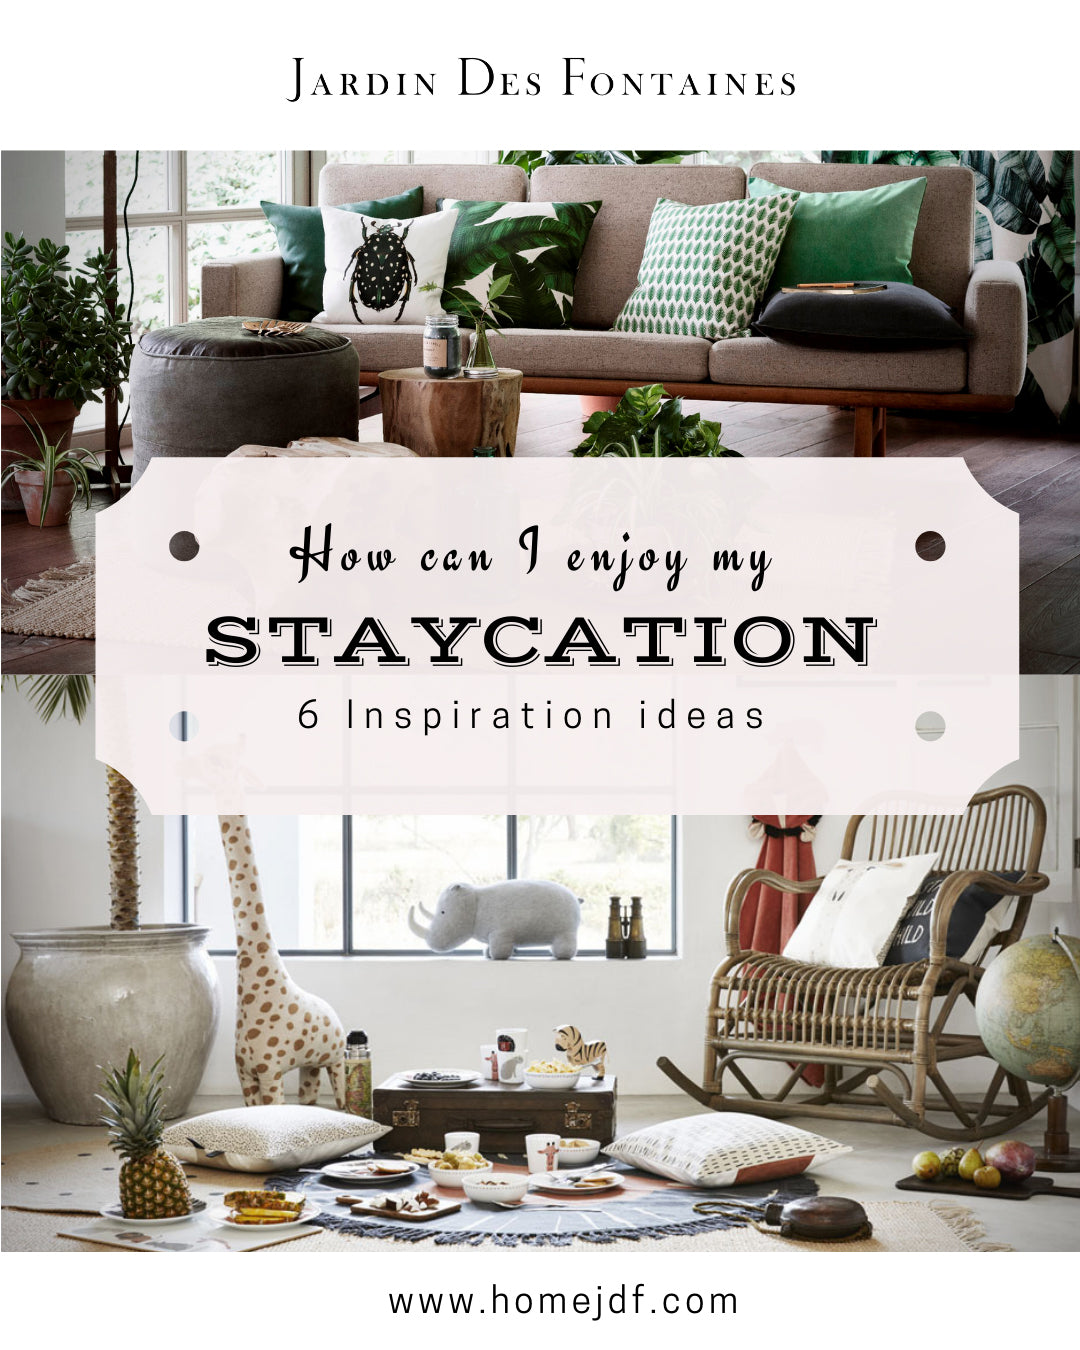 6 Inspiration Ideas for your staycation - JARDIN DES FONTAINES